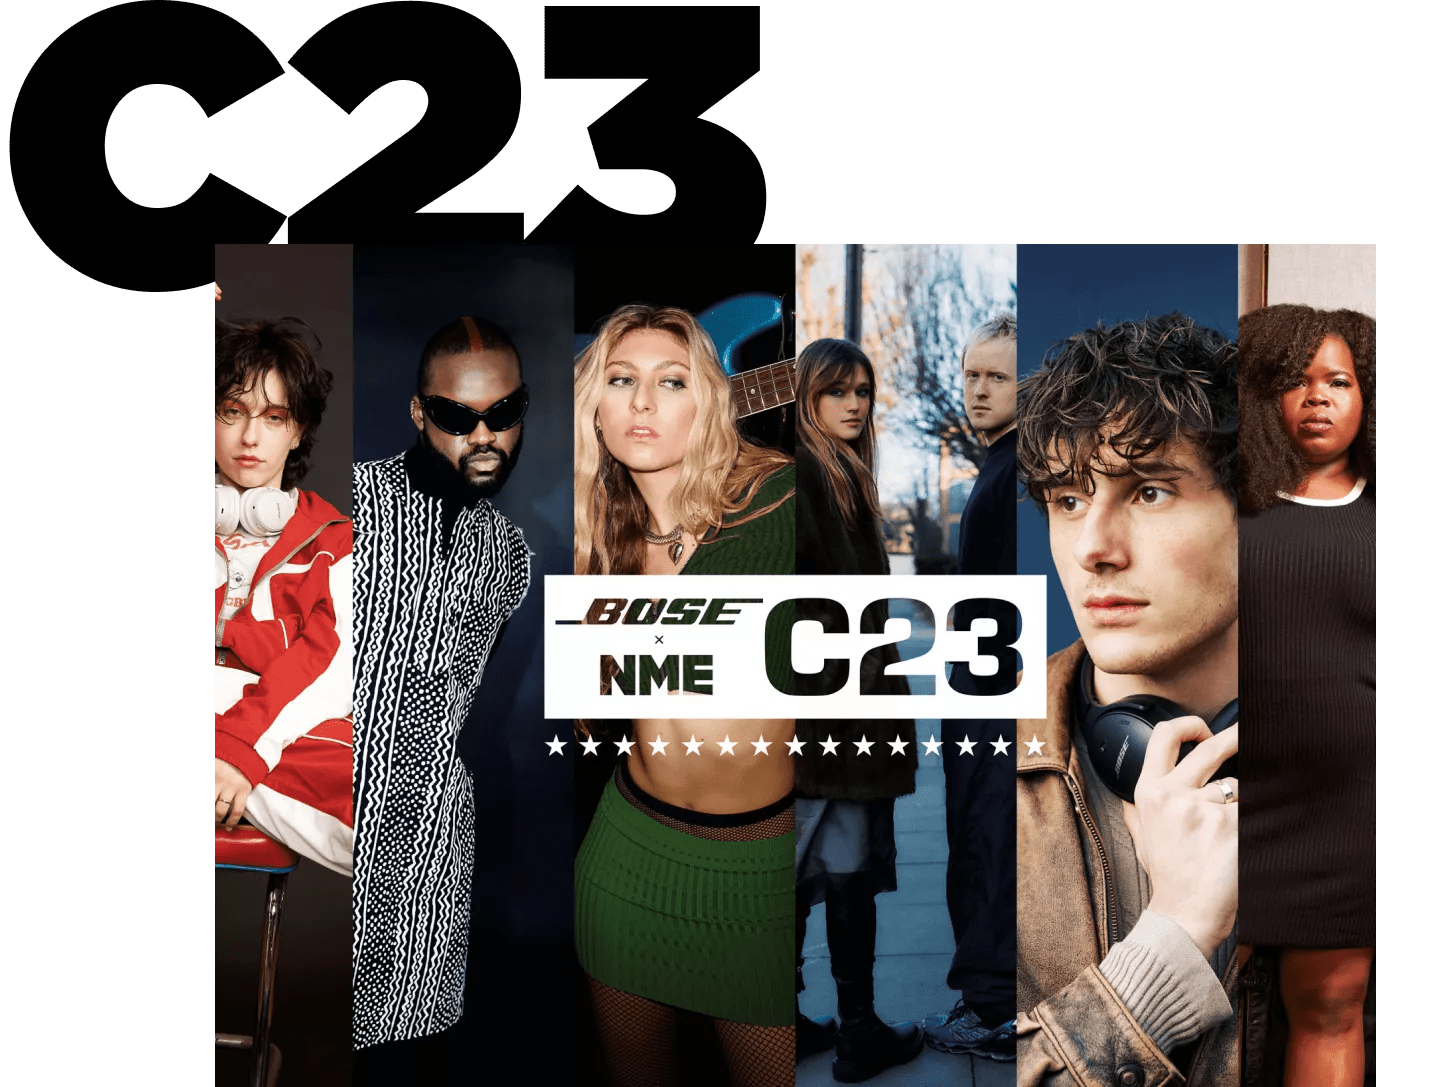 BOSE x NME C23 and the artists